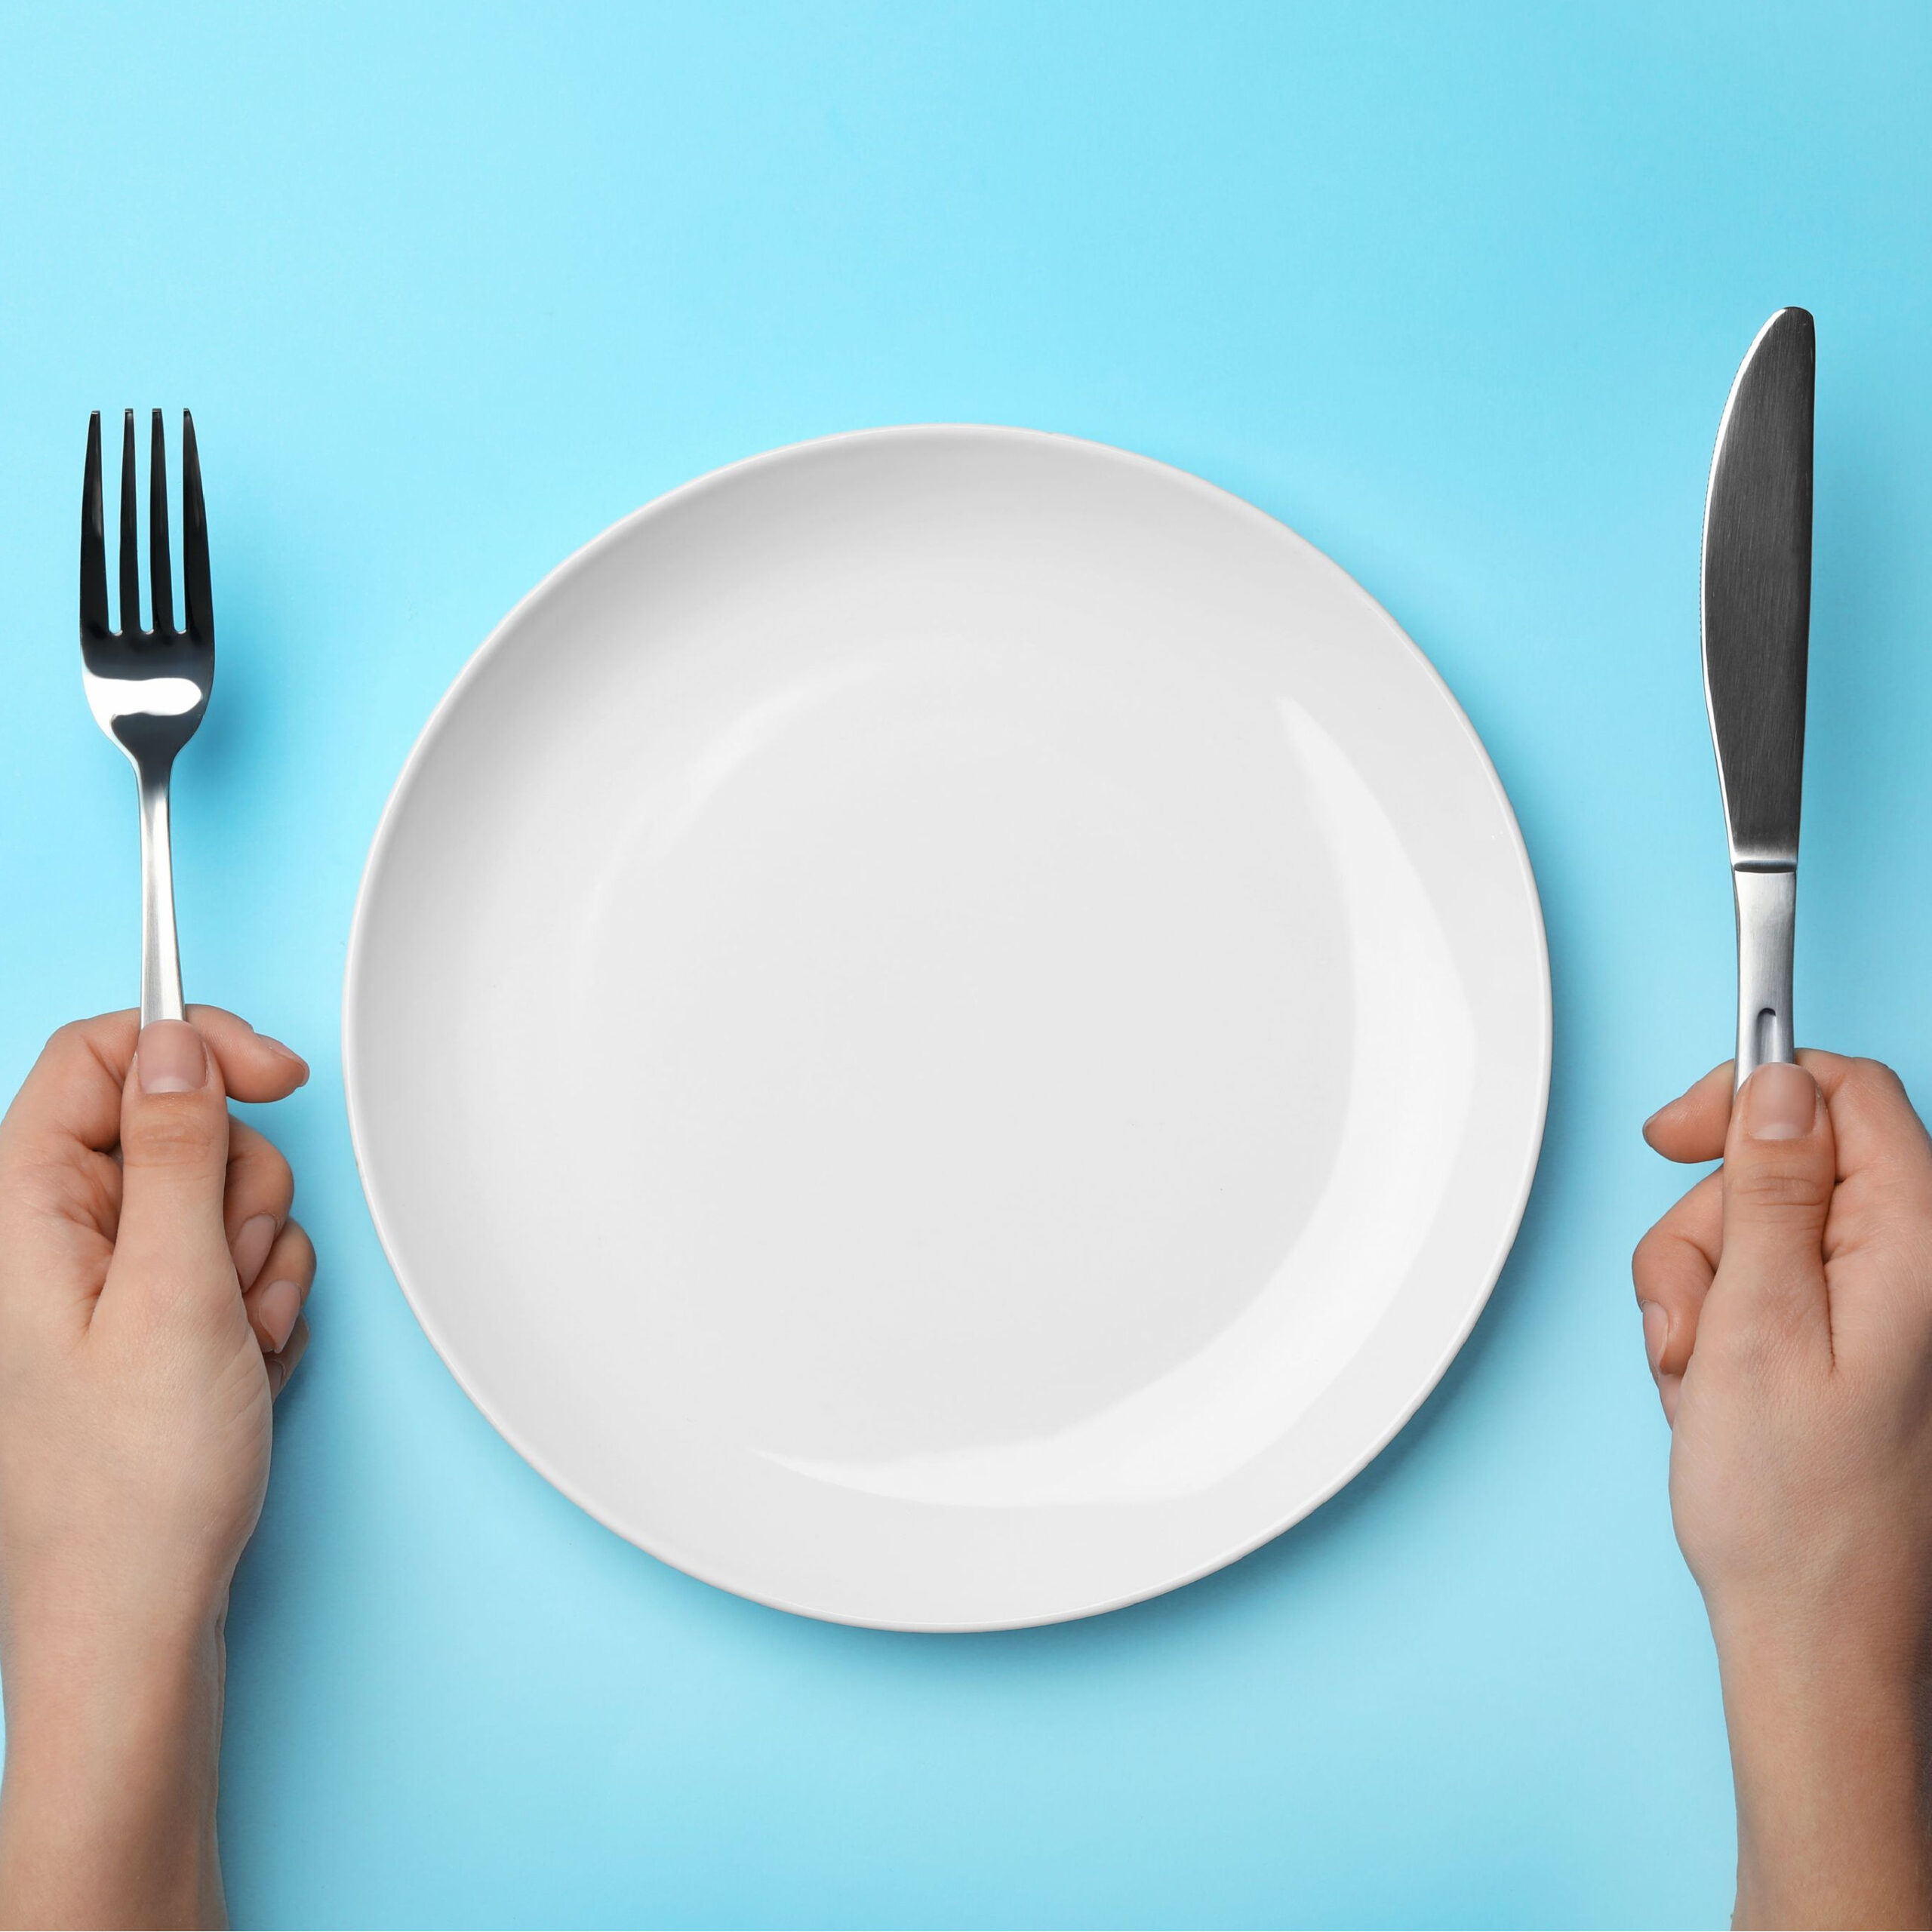 utensils at empty plate